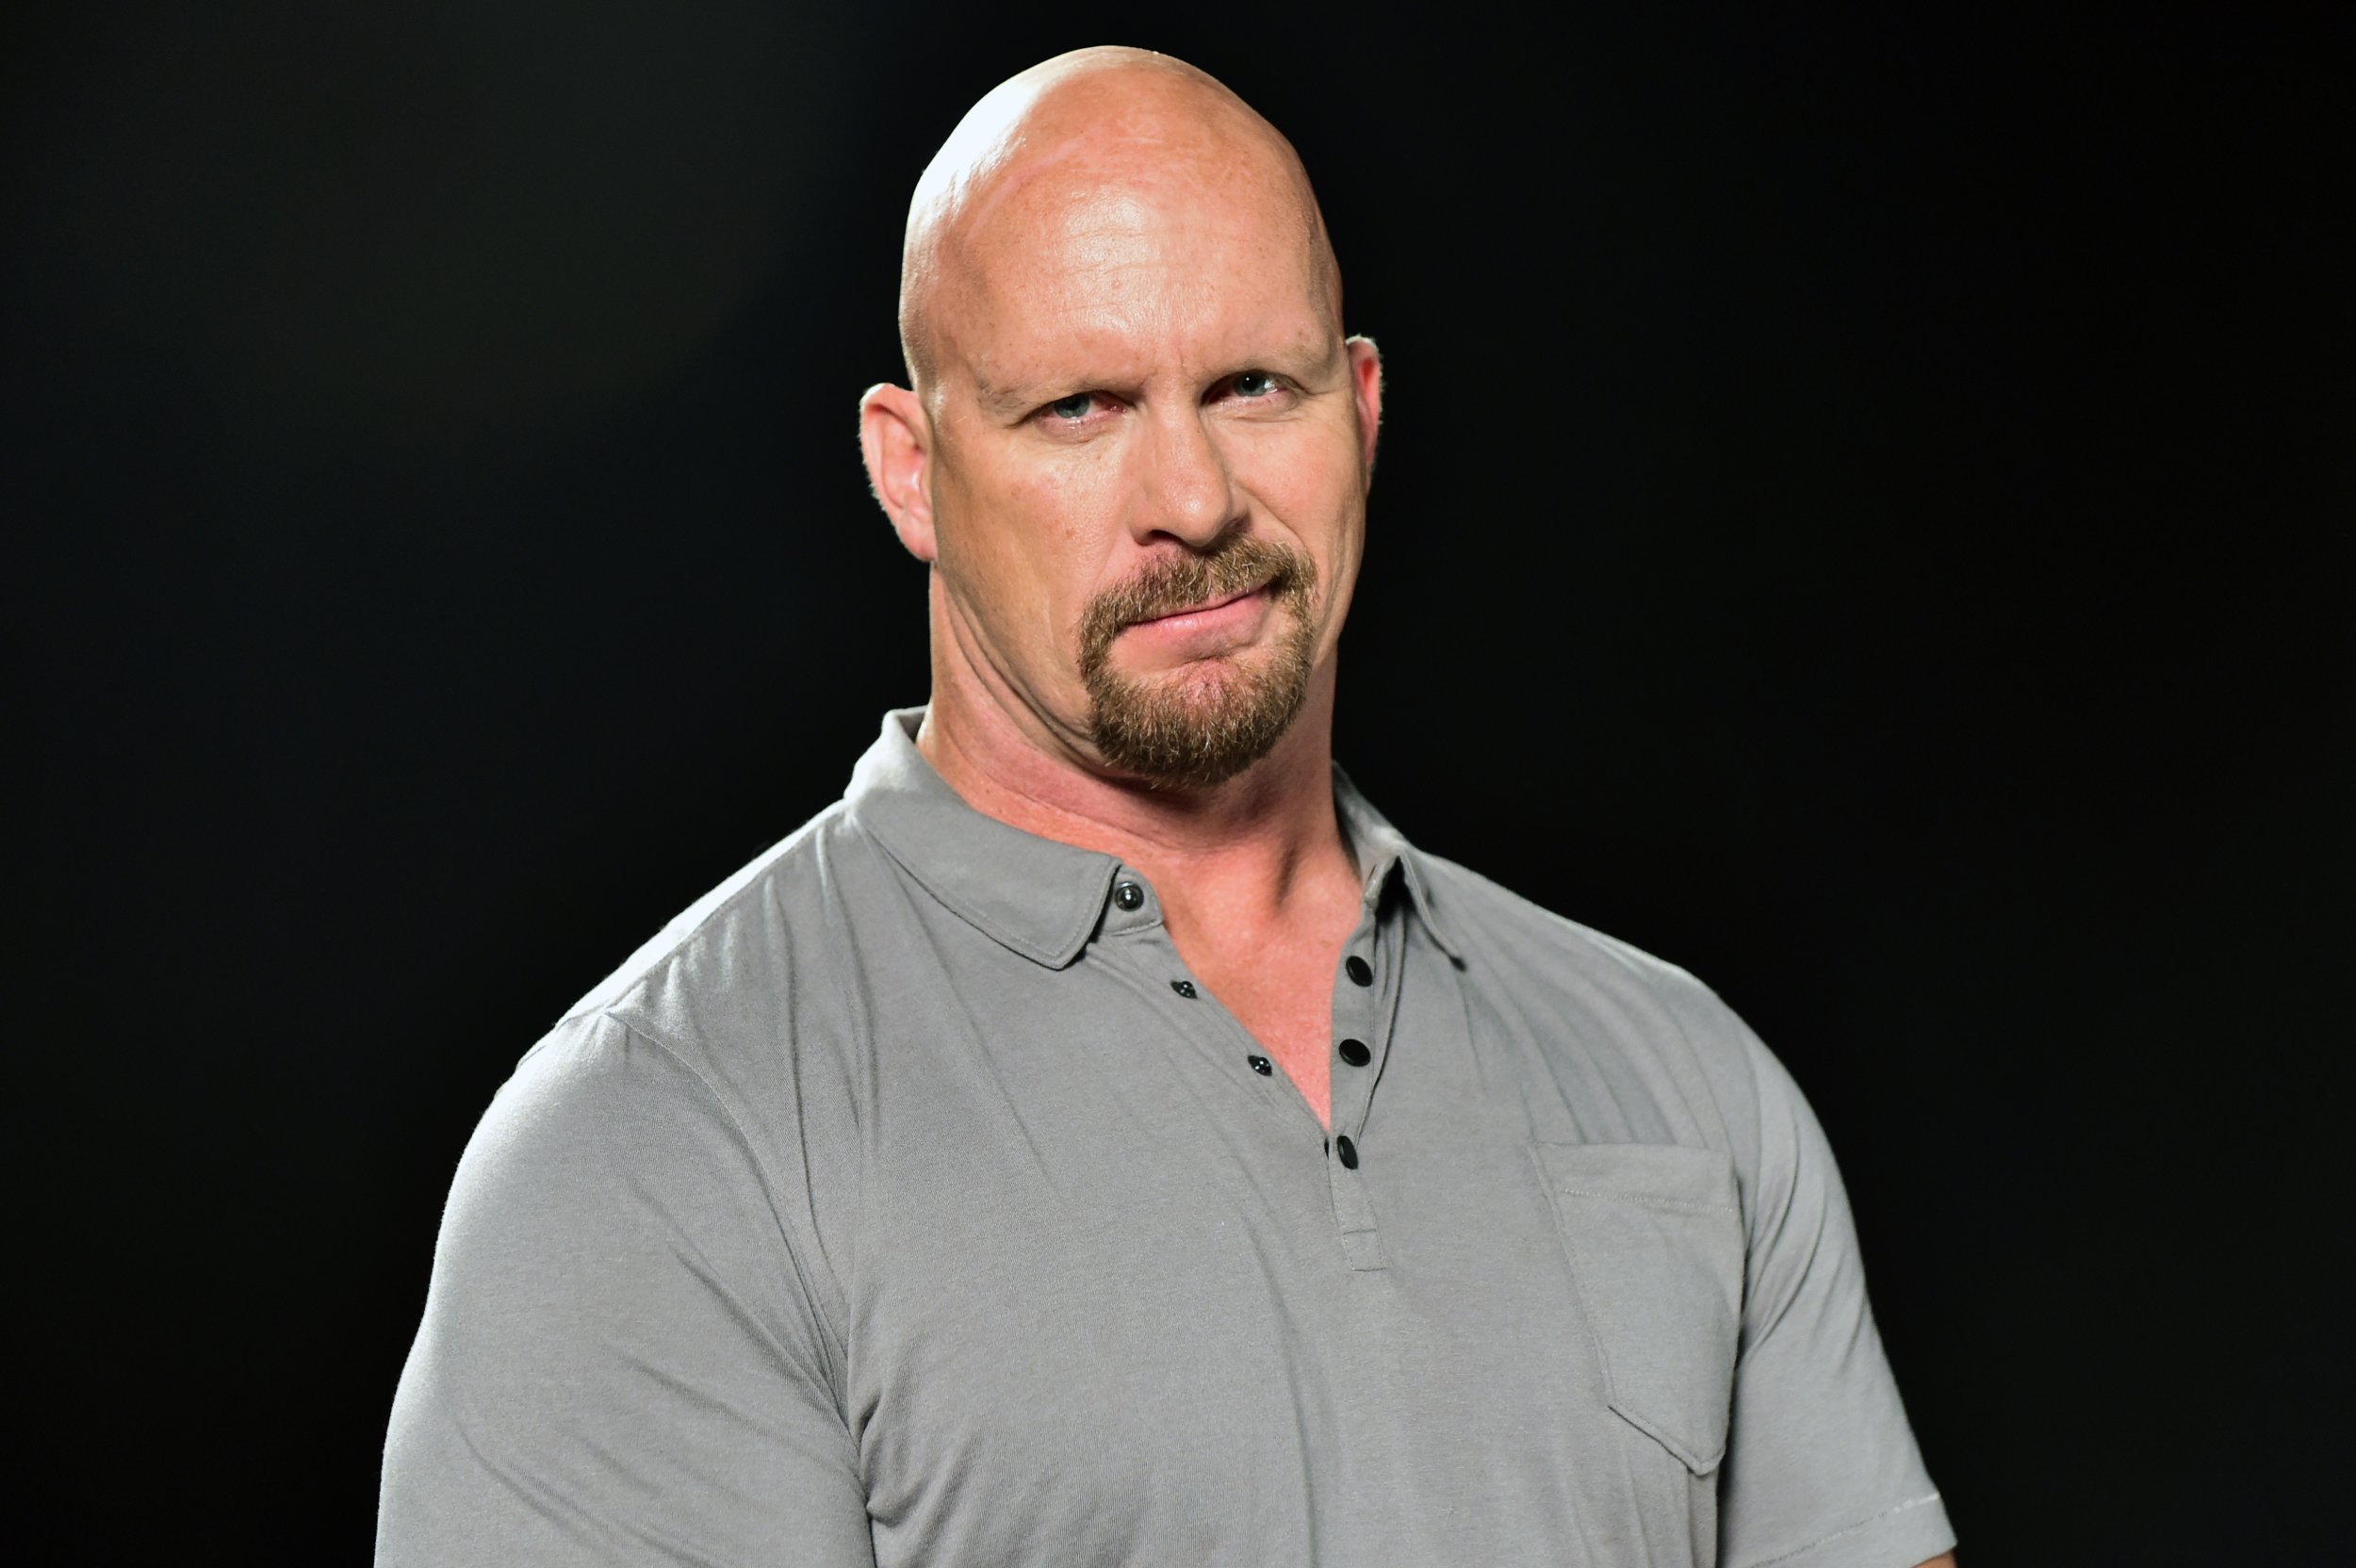 'Stone Cold' Steve Austin Net Worth Here's How Rich The WWE Superstar